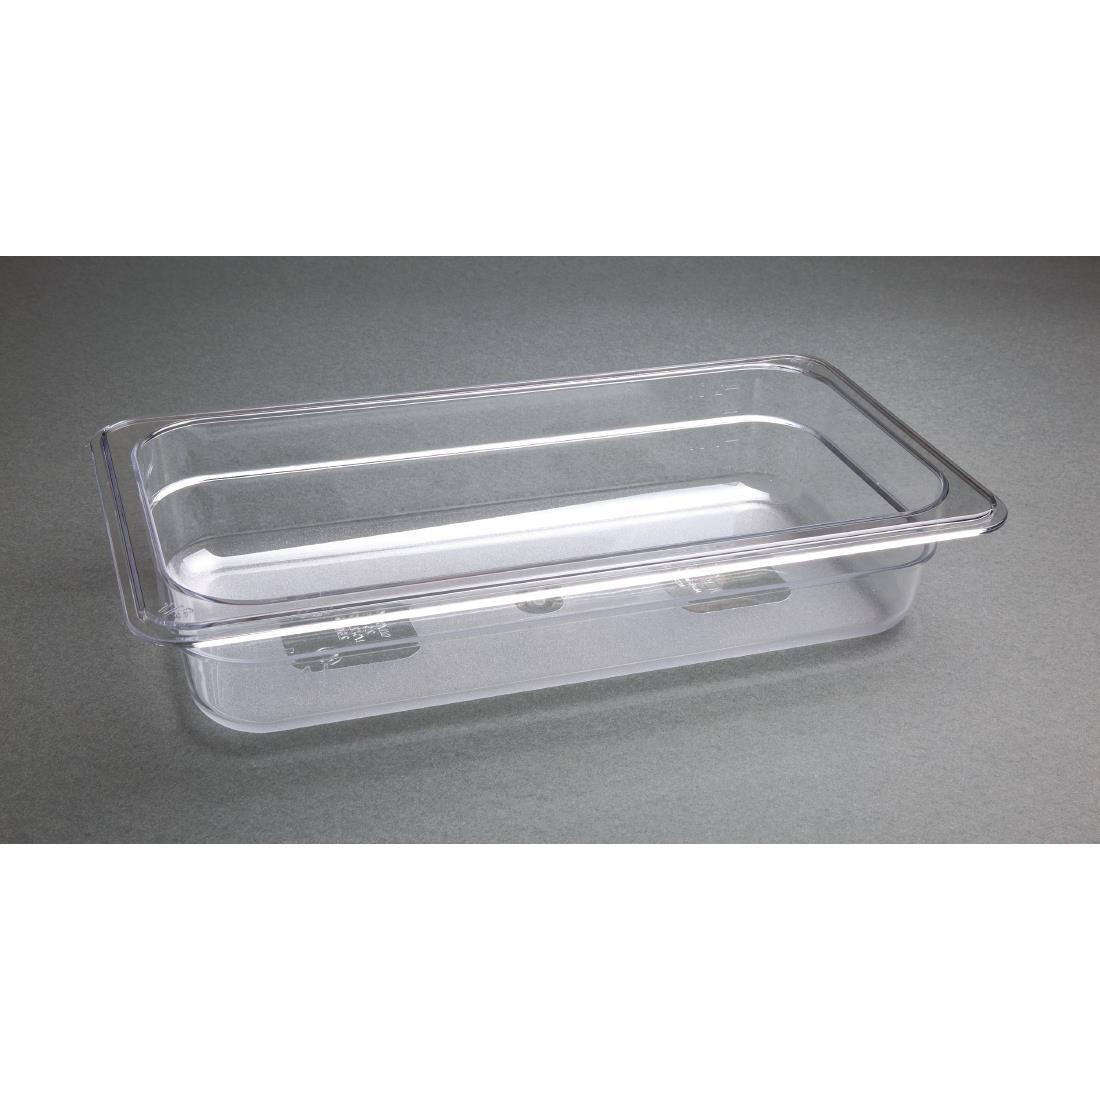 Vogue Polycarbonate 1/3 Gastronorm Container 65mm Clear - U232  - 6